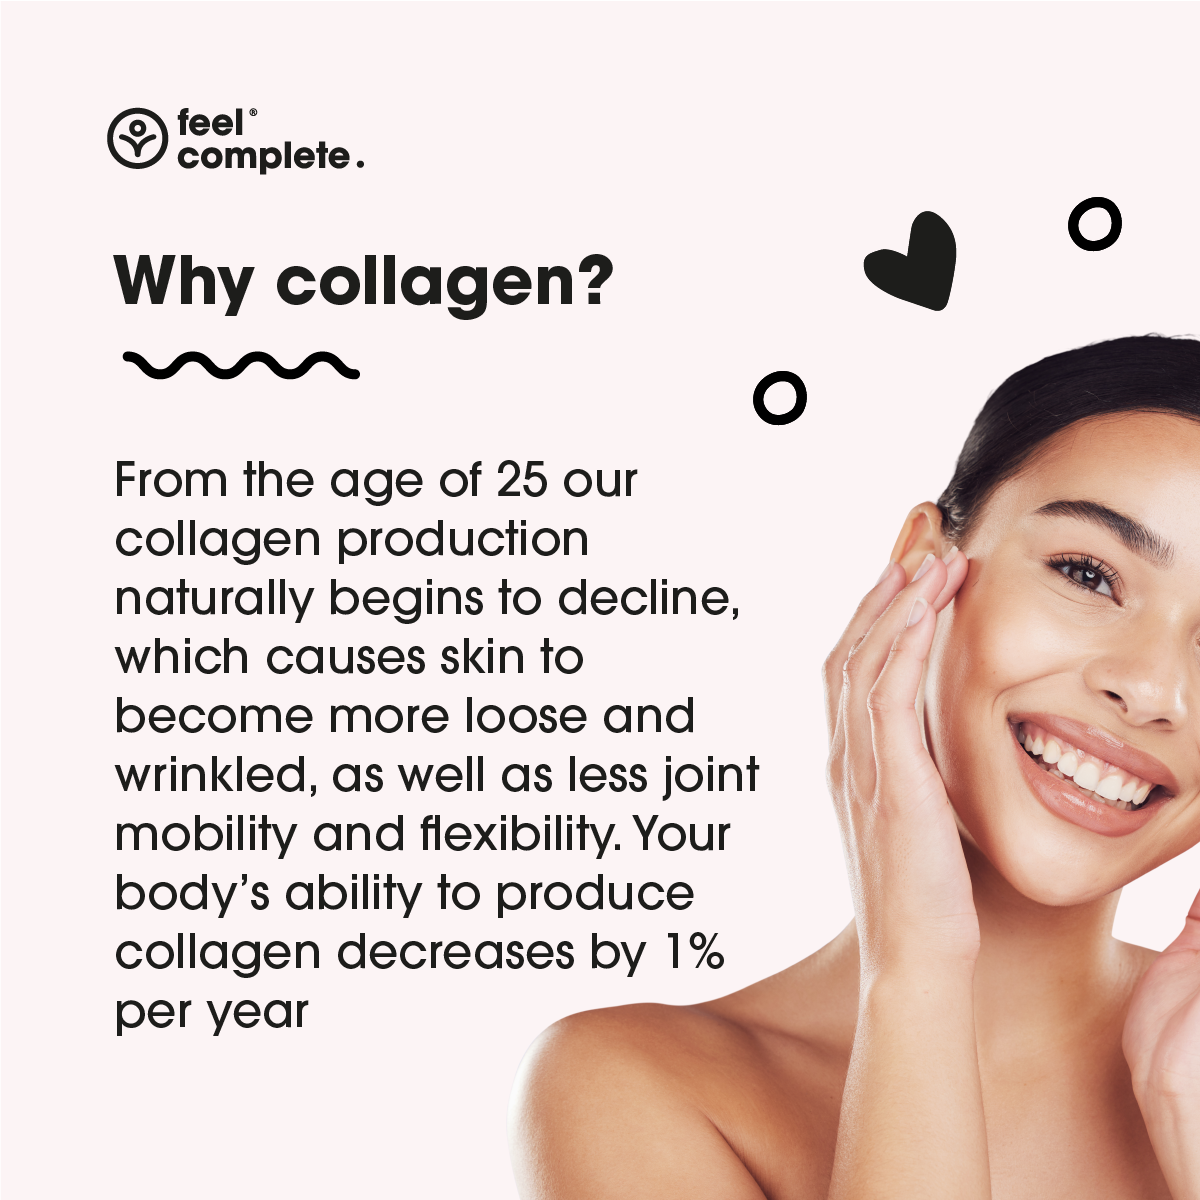 Skin Collagen Monthly Subscription